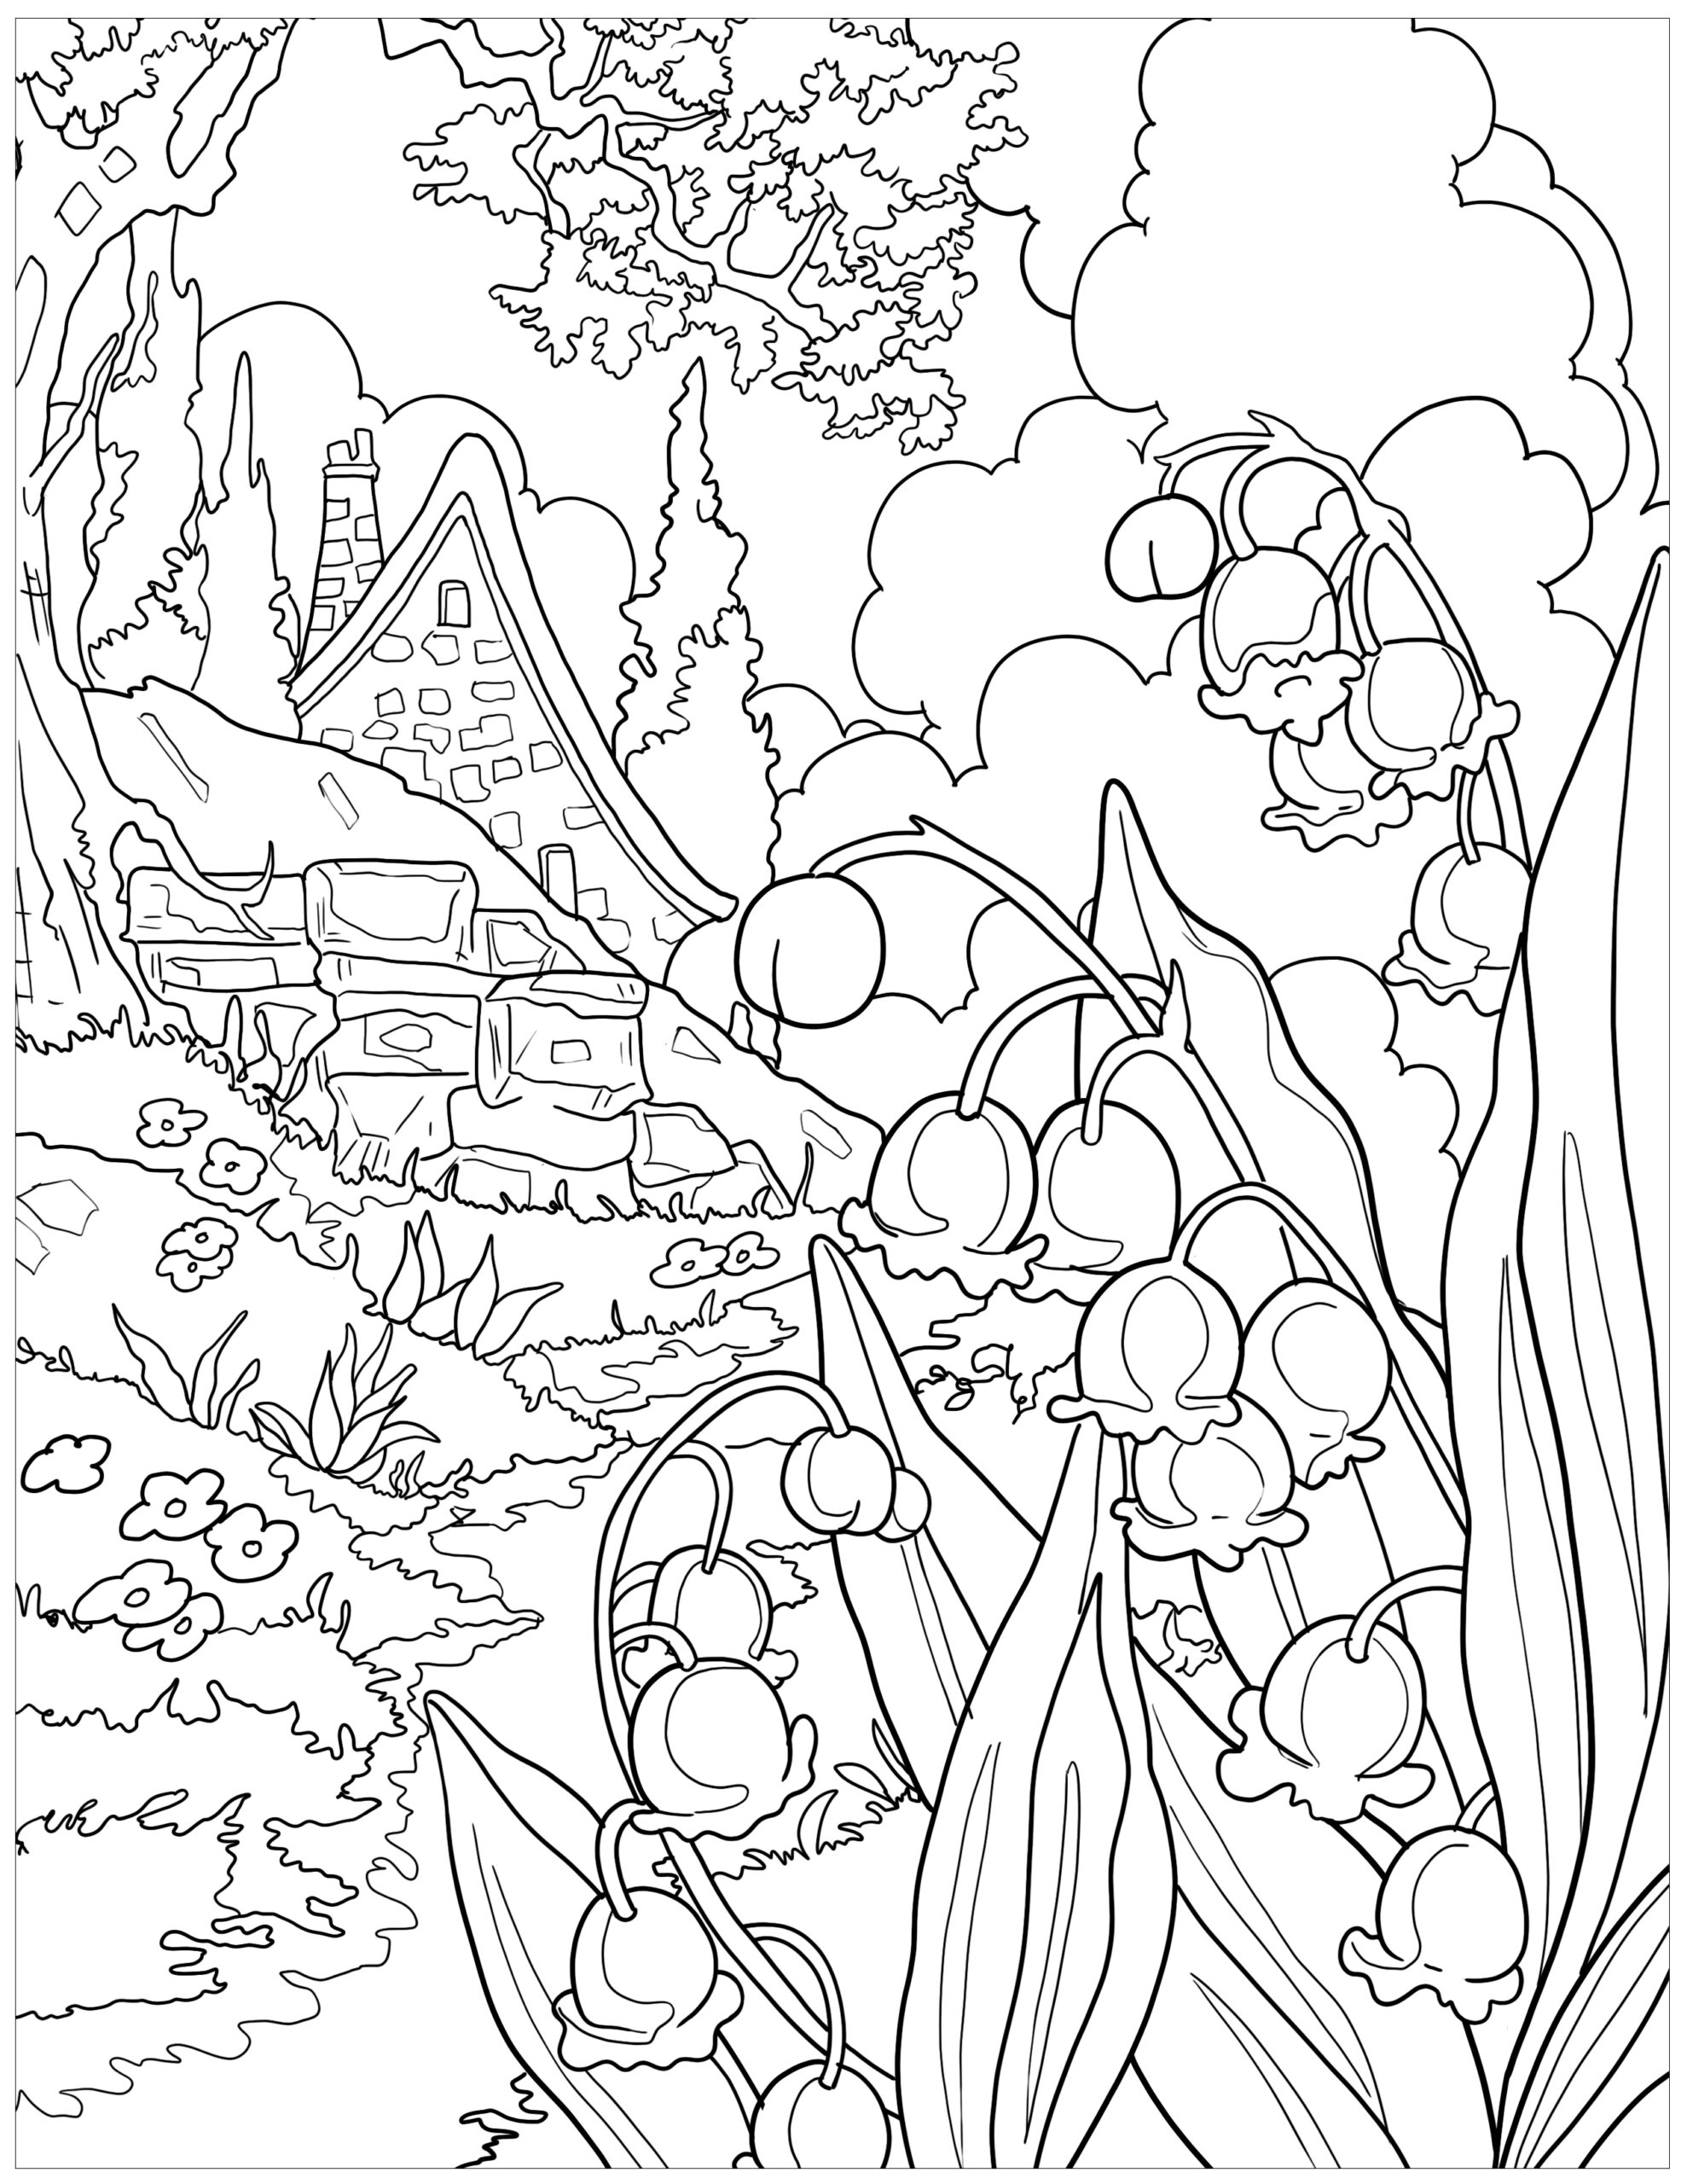 Explore natures beauty with our printable landscape coloring pages made by teachers